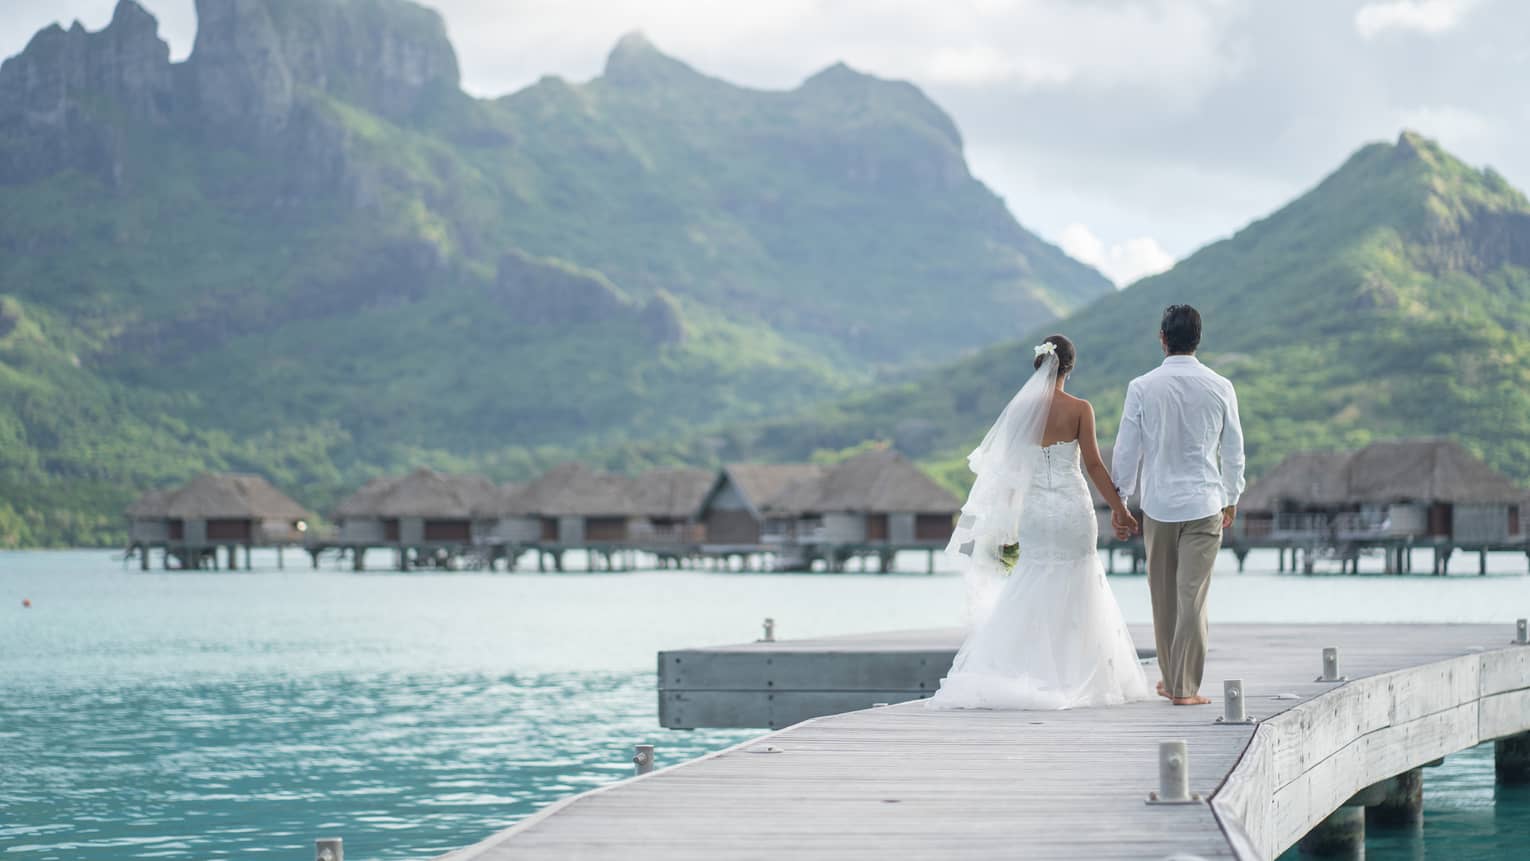 Bride and groom on overwater bungalow walkway, Bora Bora mountains in background